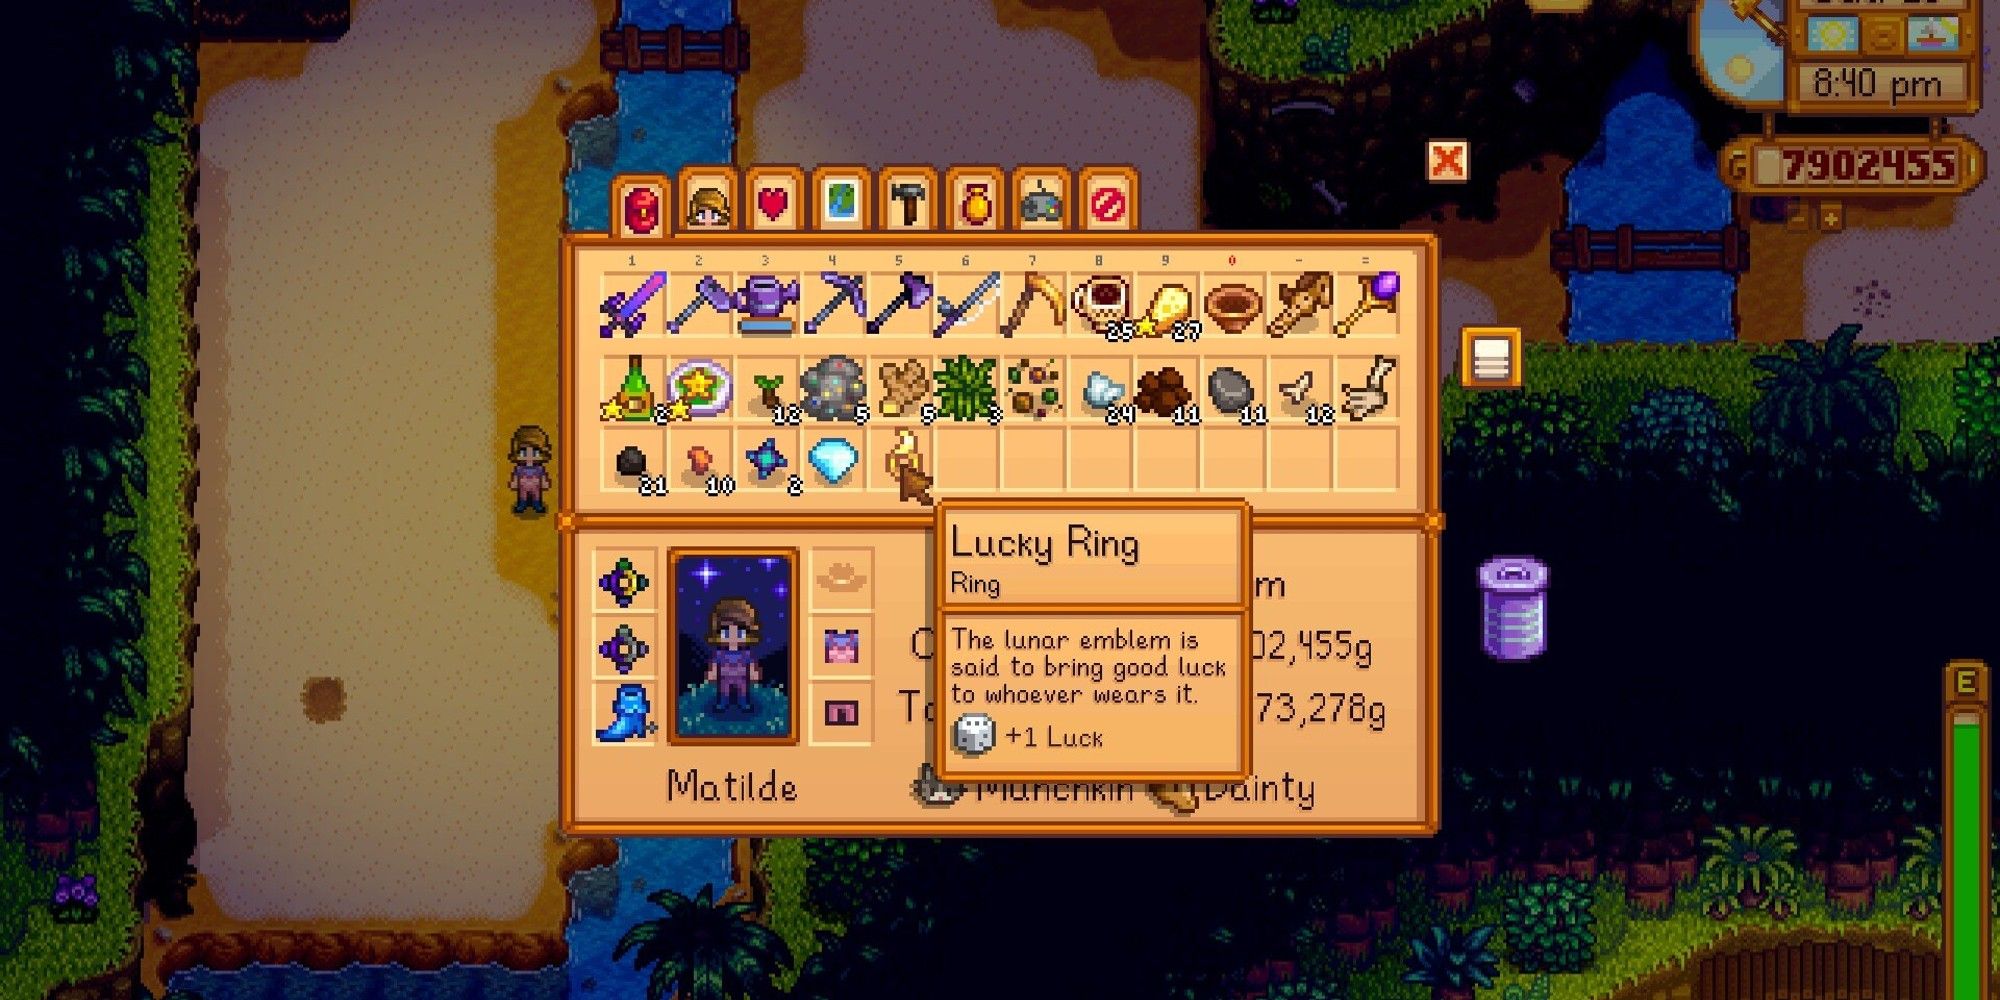 player selecting the lucky ring in their inventory